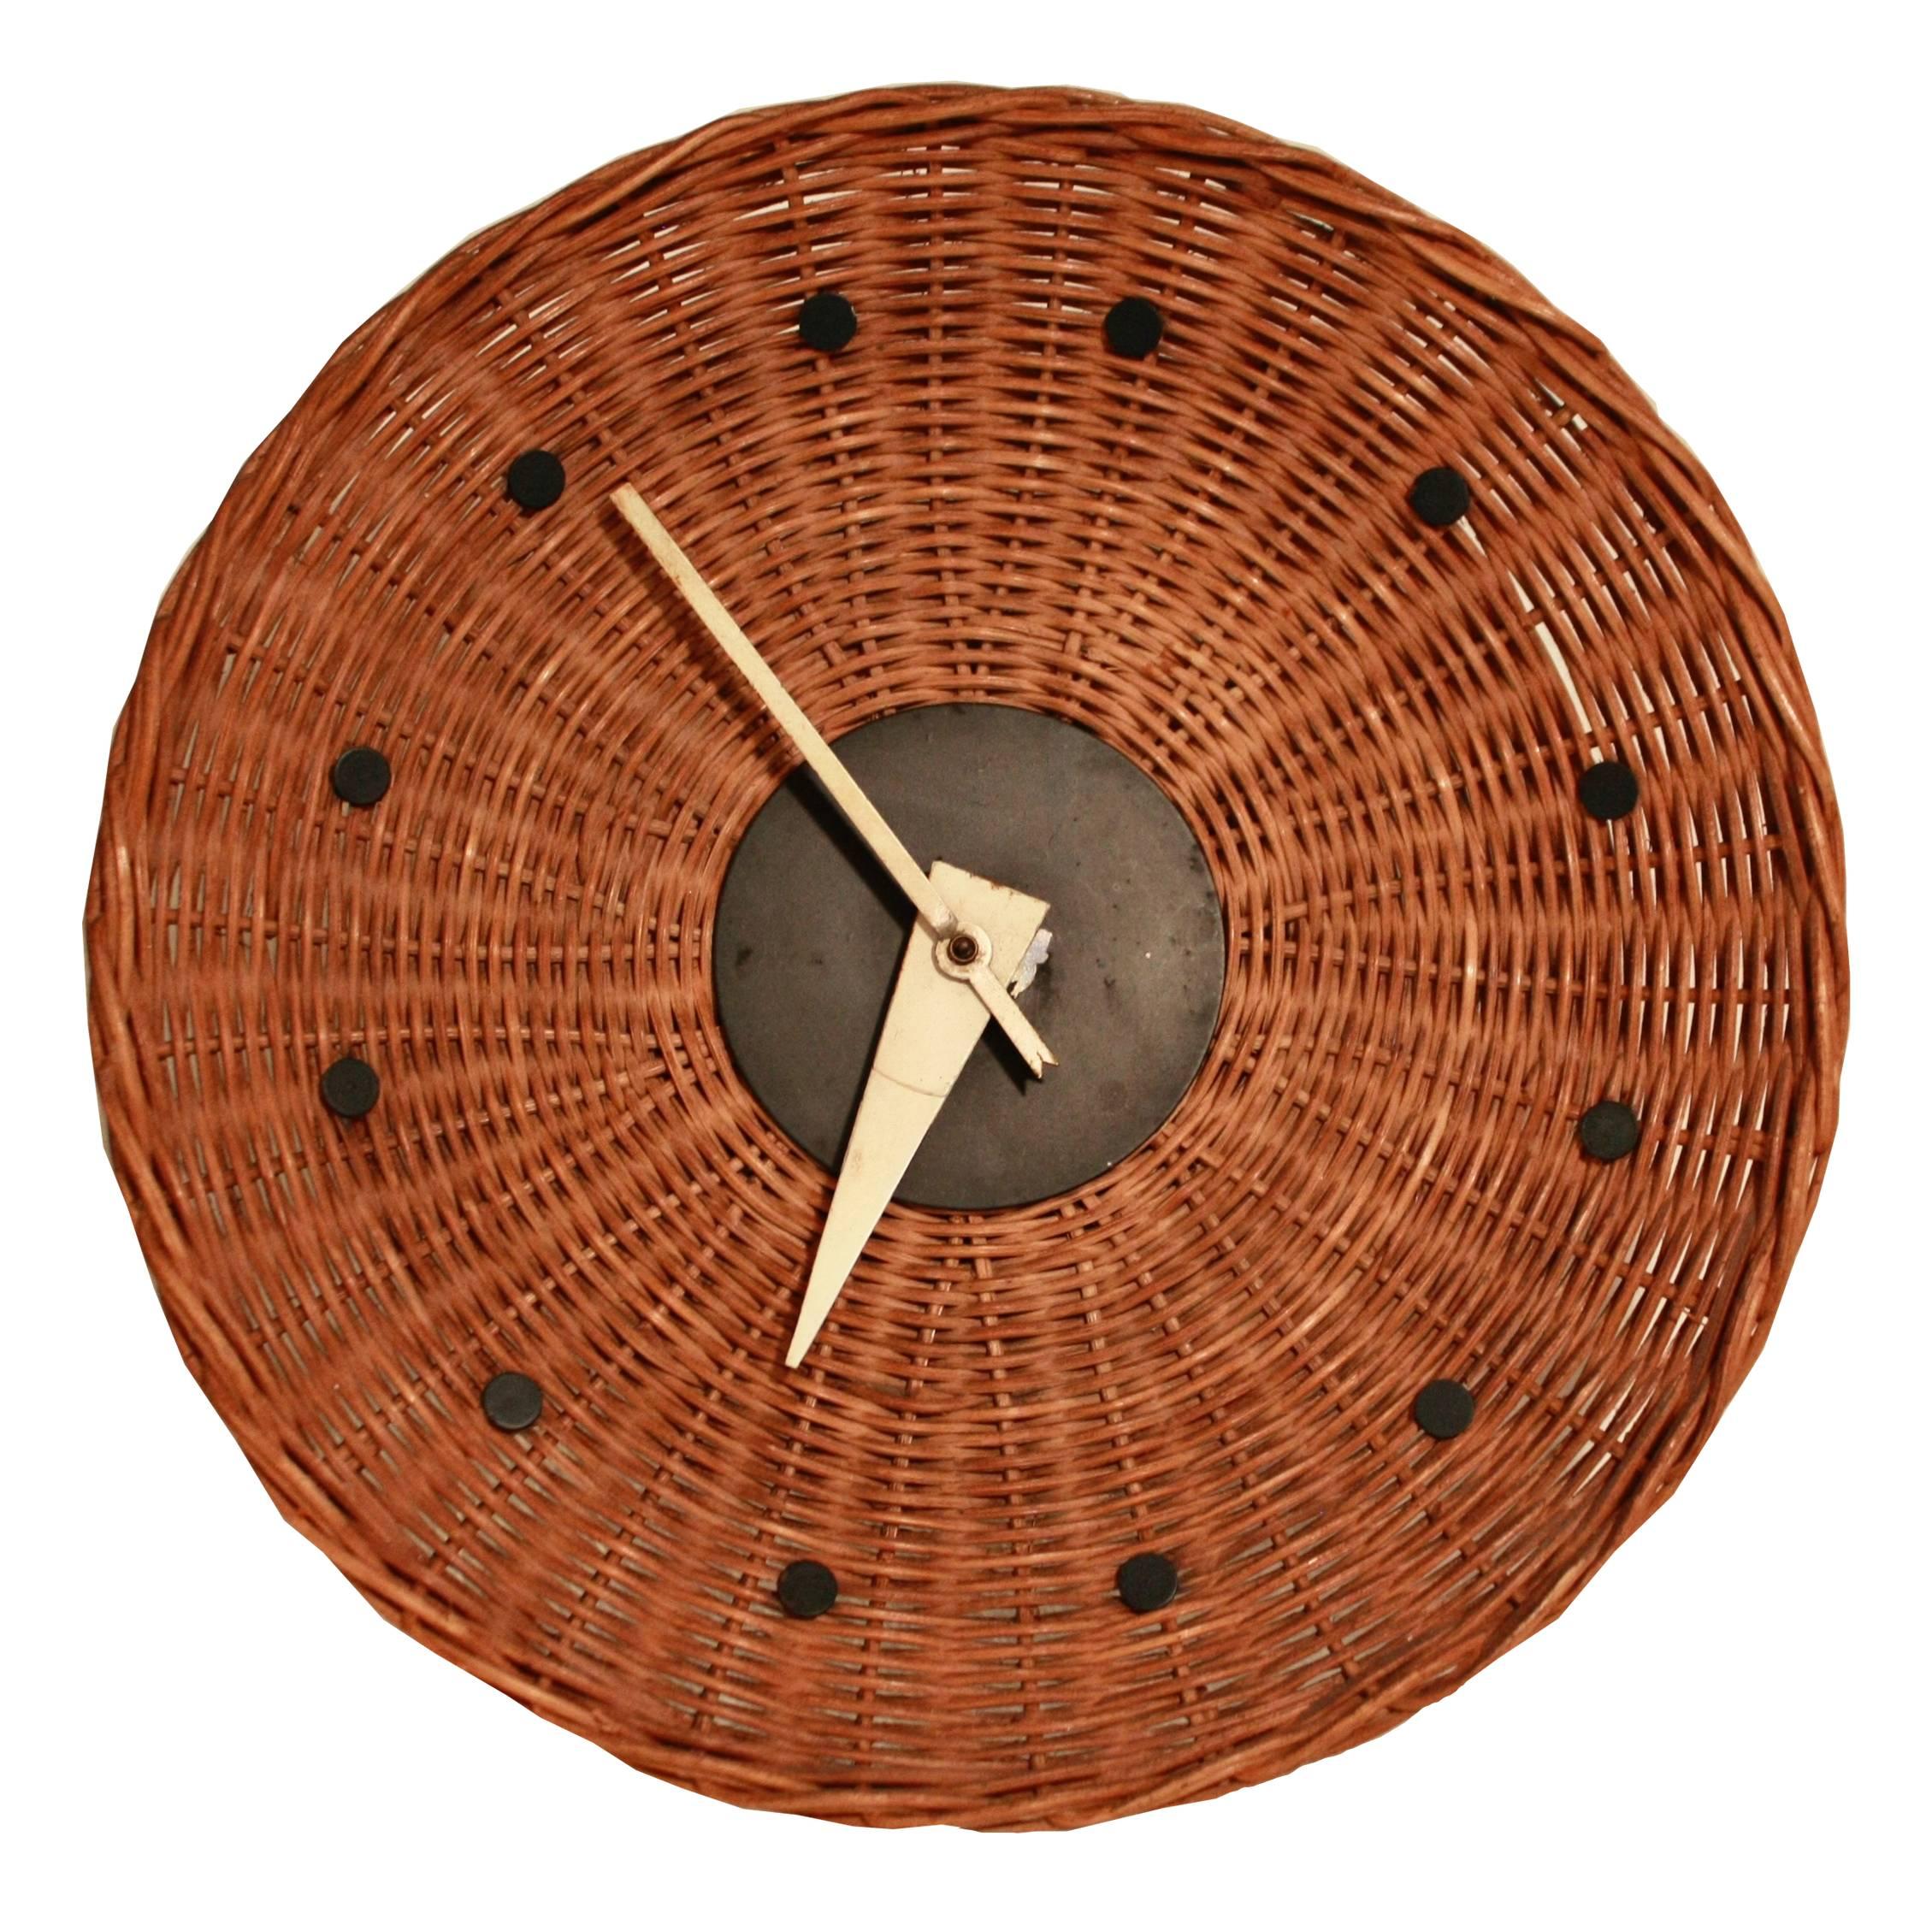 Woven Rattan "Basket Clock" by George Nelson for Howard Miller, 1950s, Rare